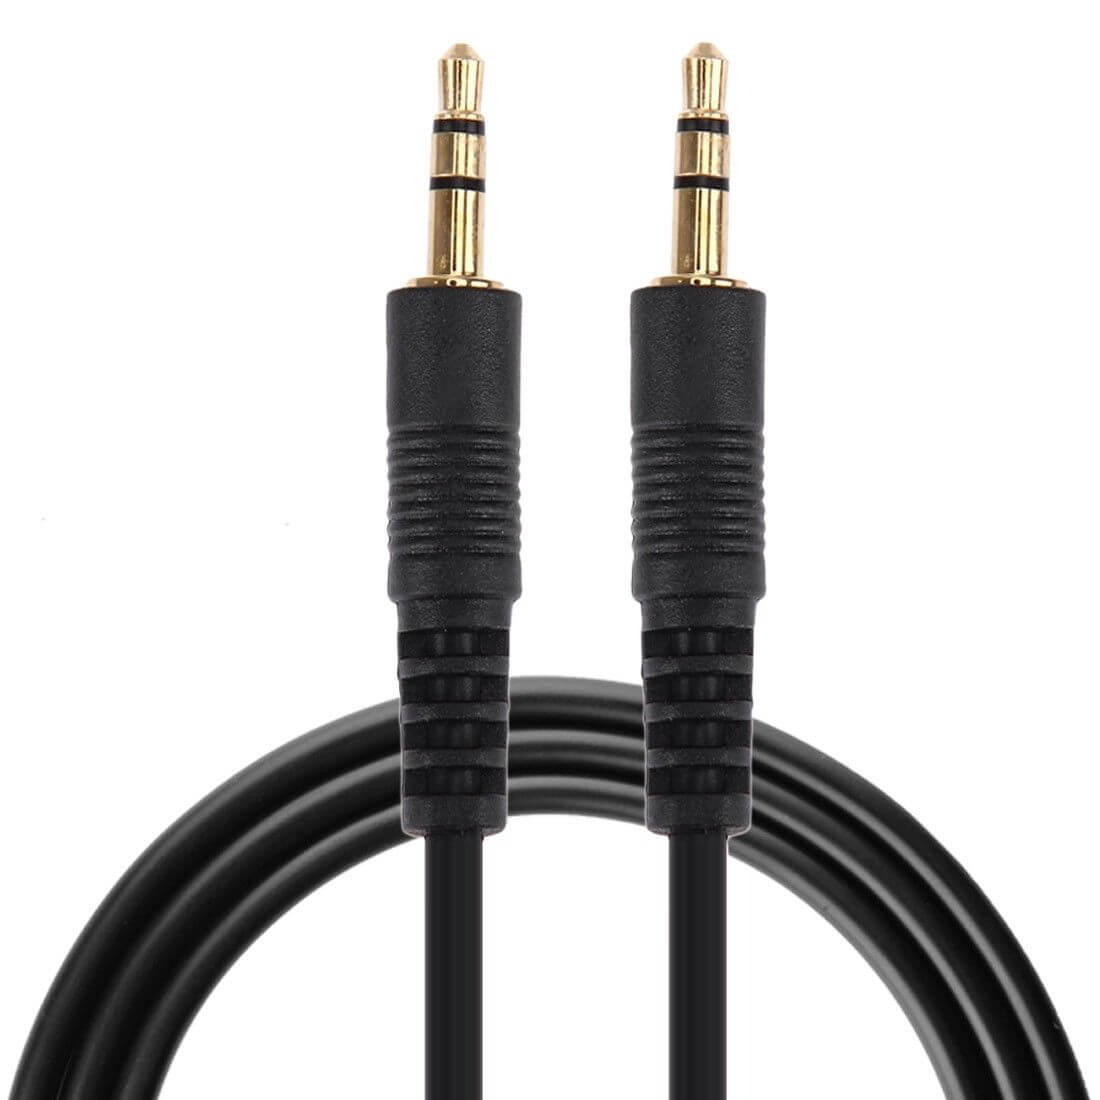 Male to Male 3.5mm Stereo Jack Aux Cable 1.5m